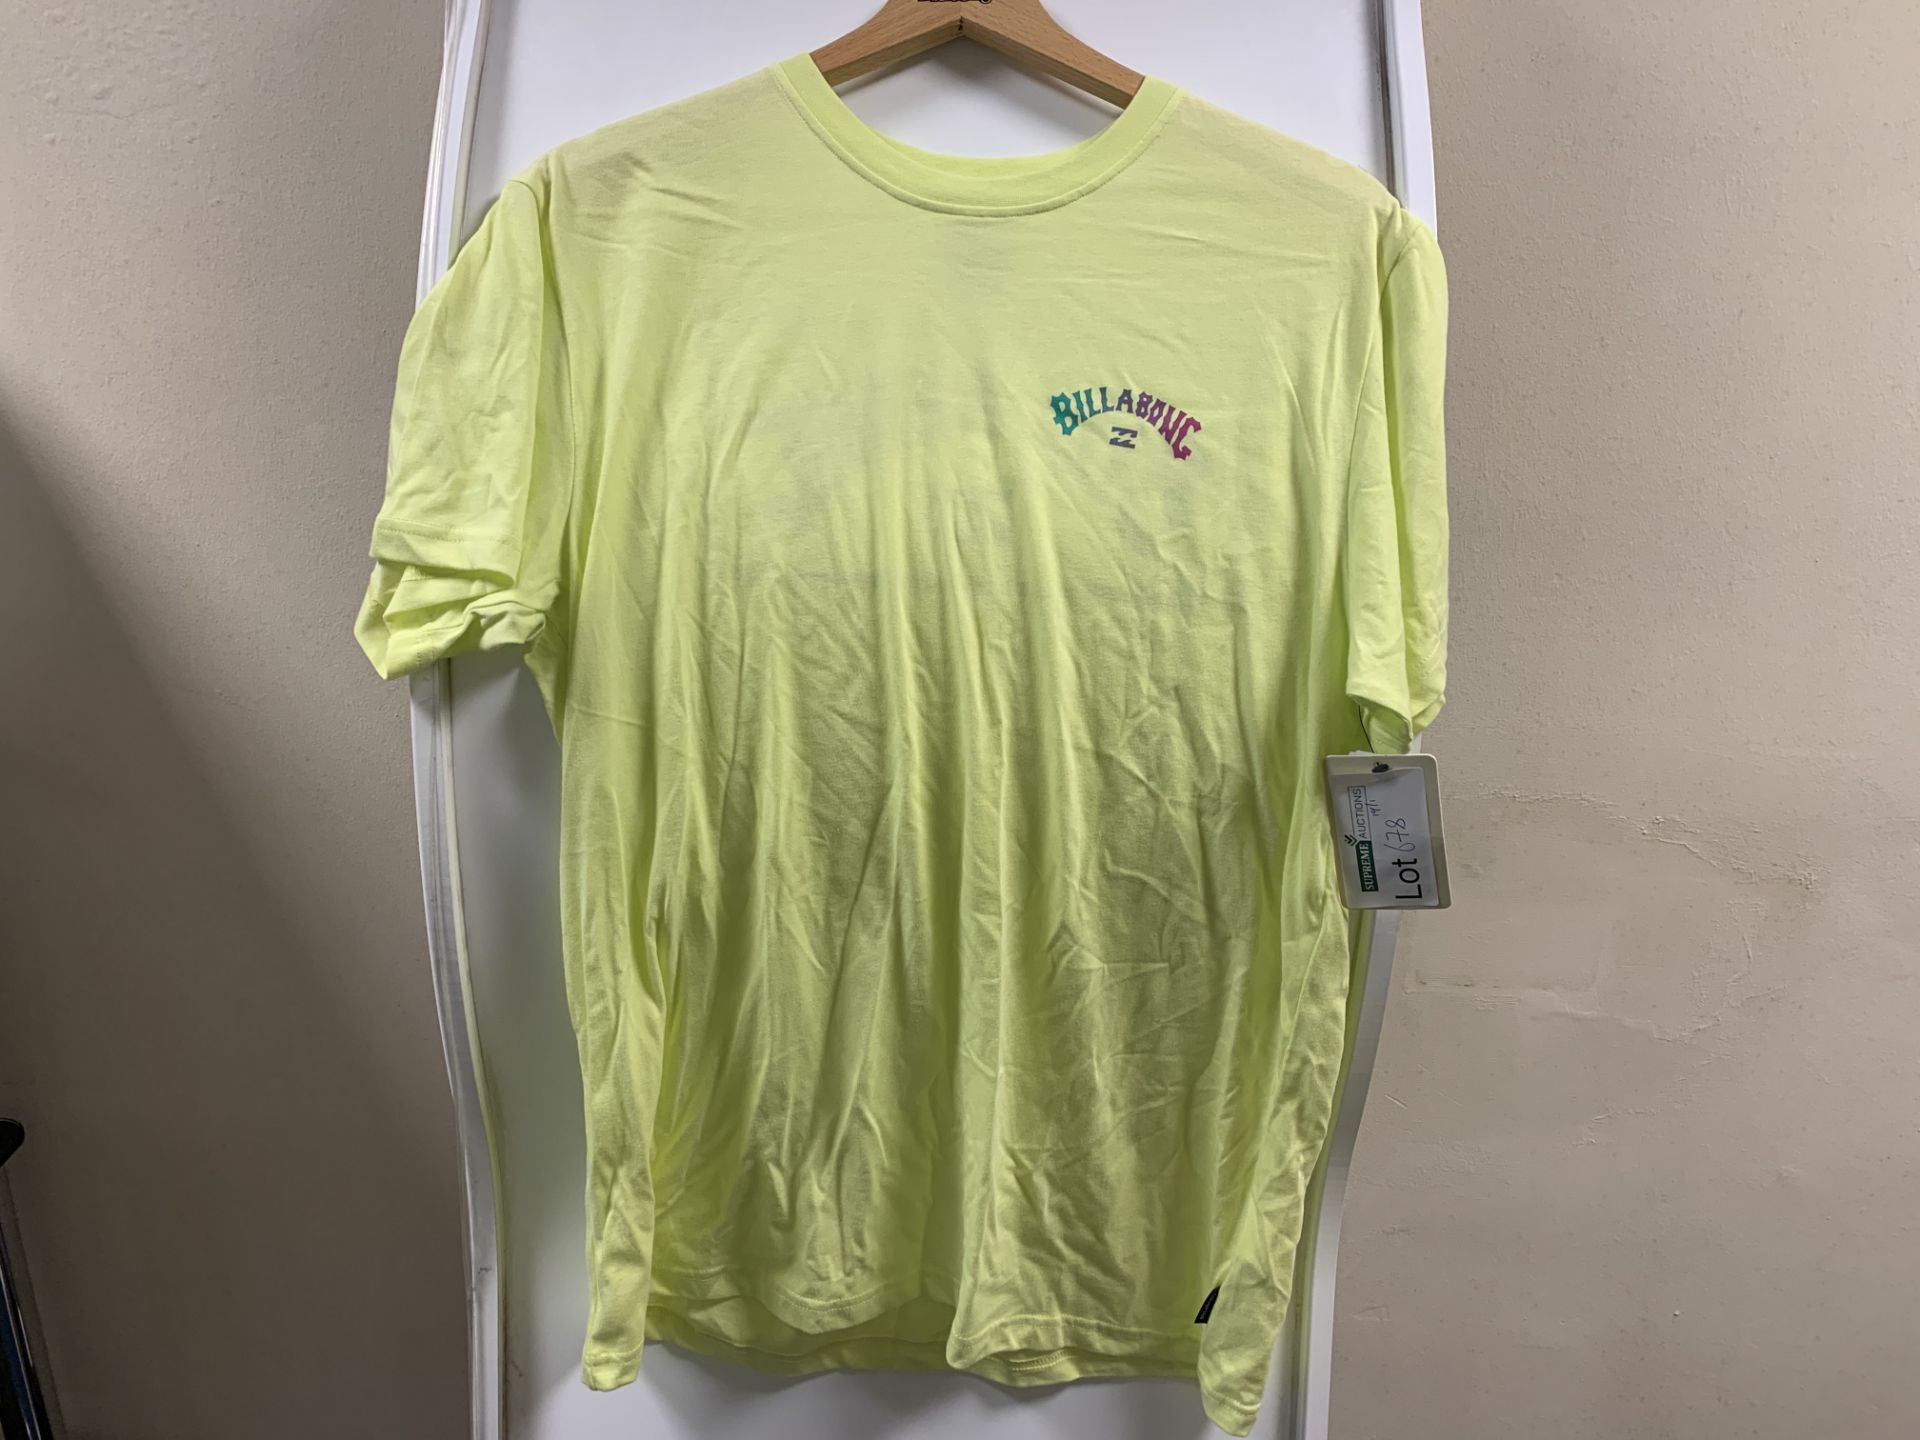 6 X BRAND NEW BILLABONG ARCH TEE NEO LEMON T SHIRTS IN VARIOUS SIZES RRP £23 EACH